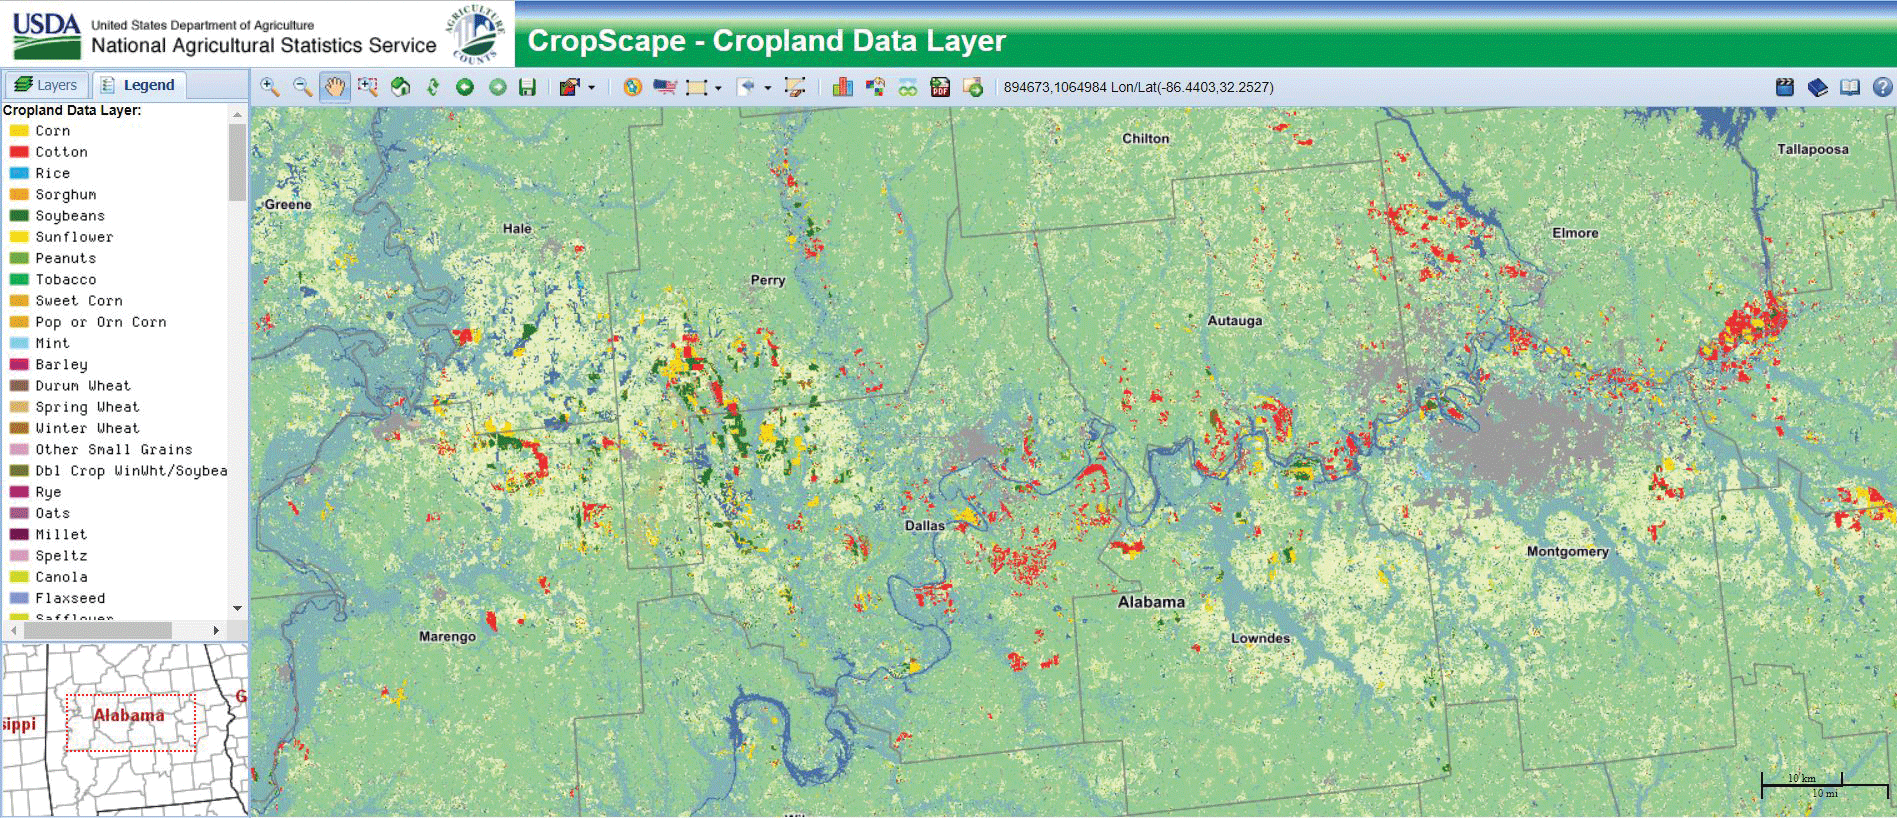 Screen capture showing land cover types in Montgomery, Alabama.